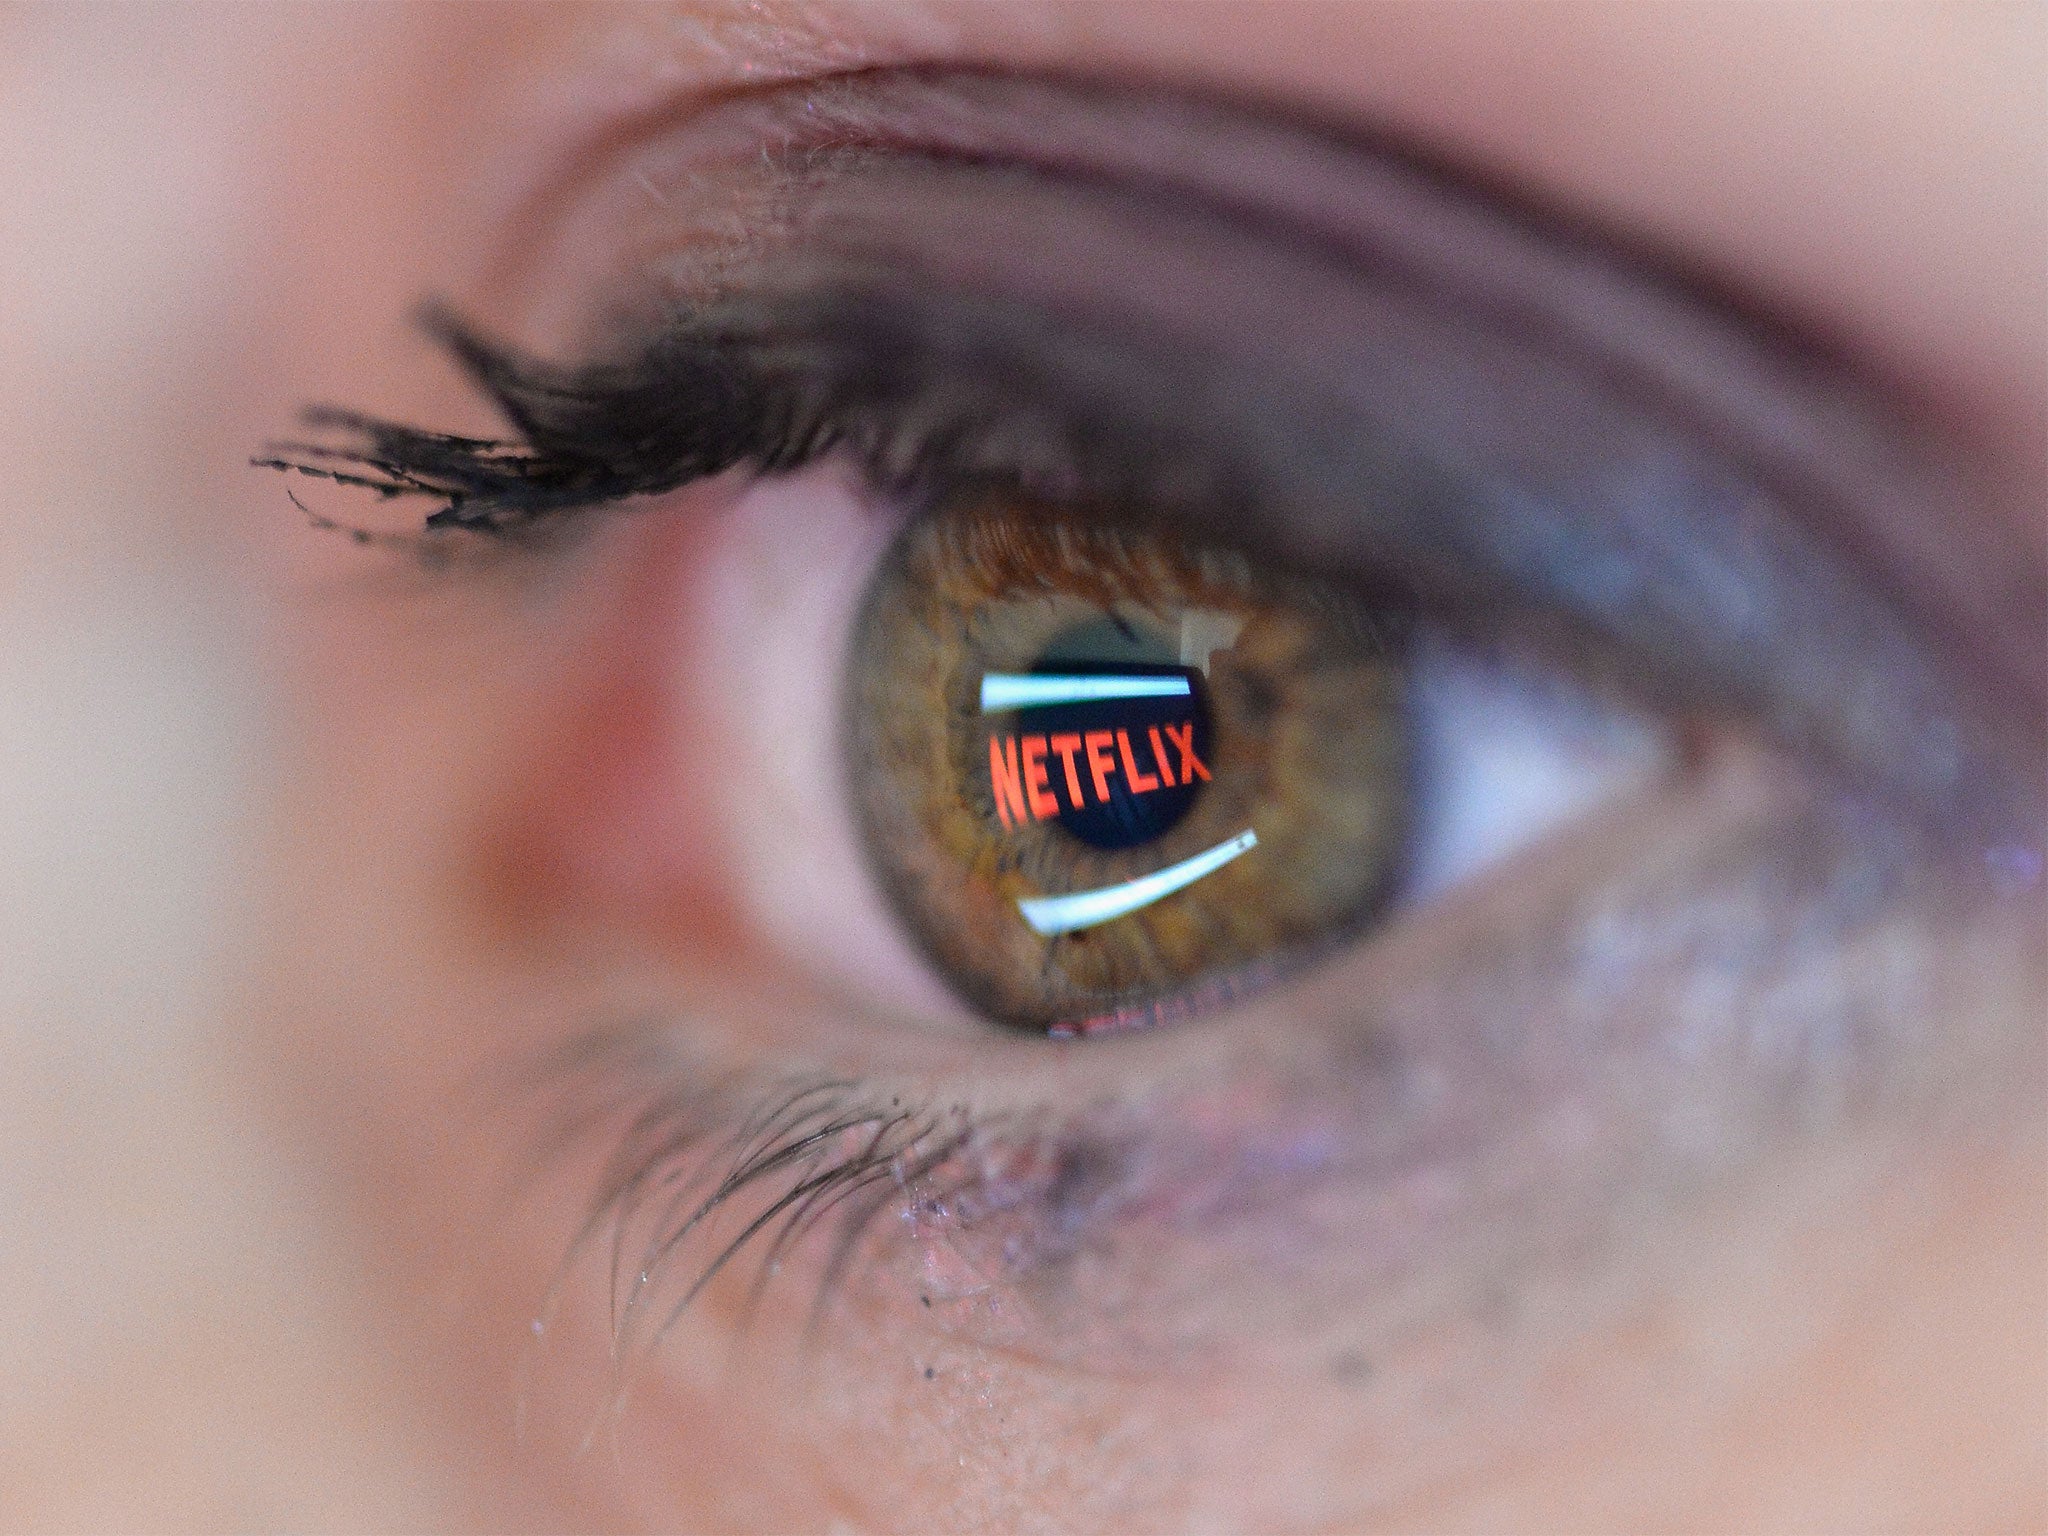 Netflix is now a hugely successful global streaming service